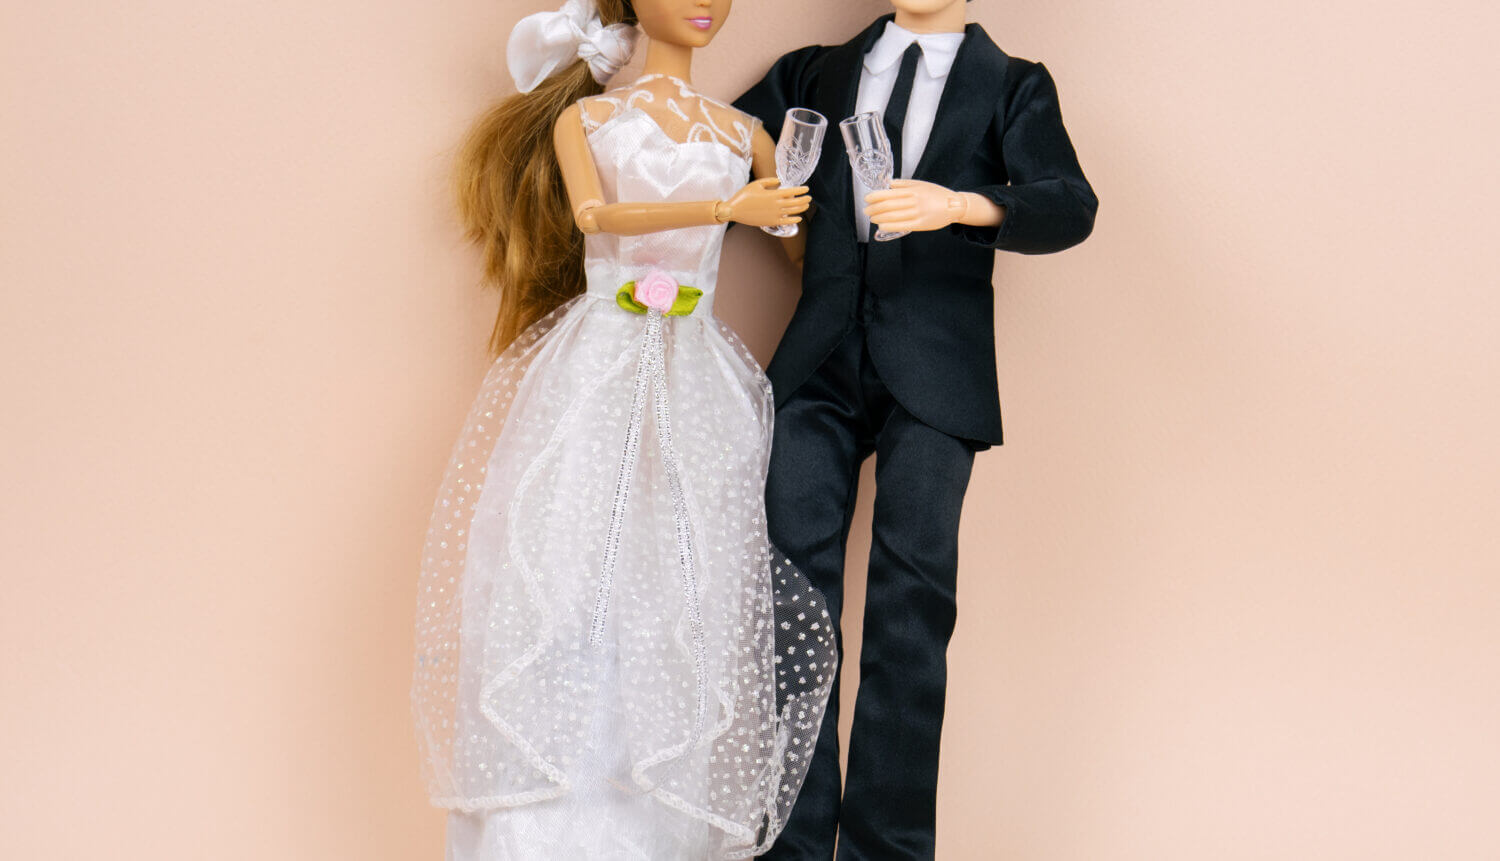 wedding dolls bride and groom with wine glasses on a beige background